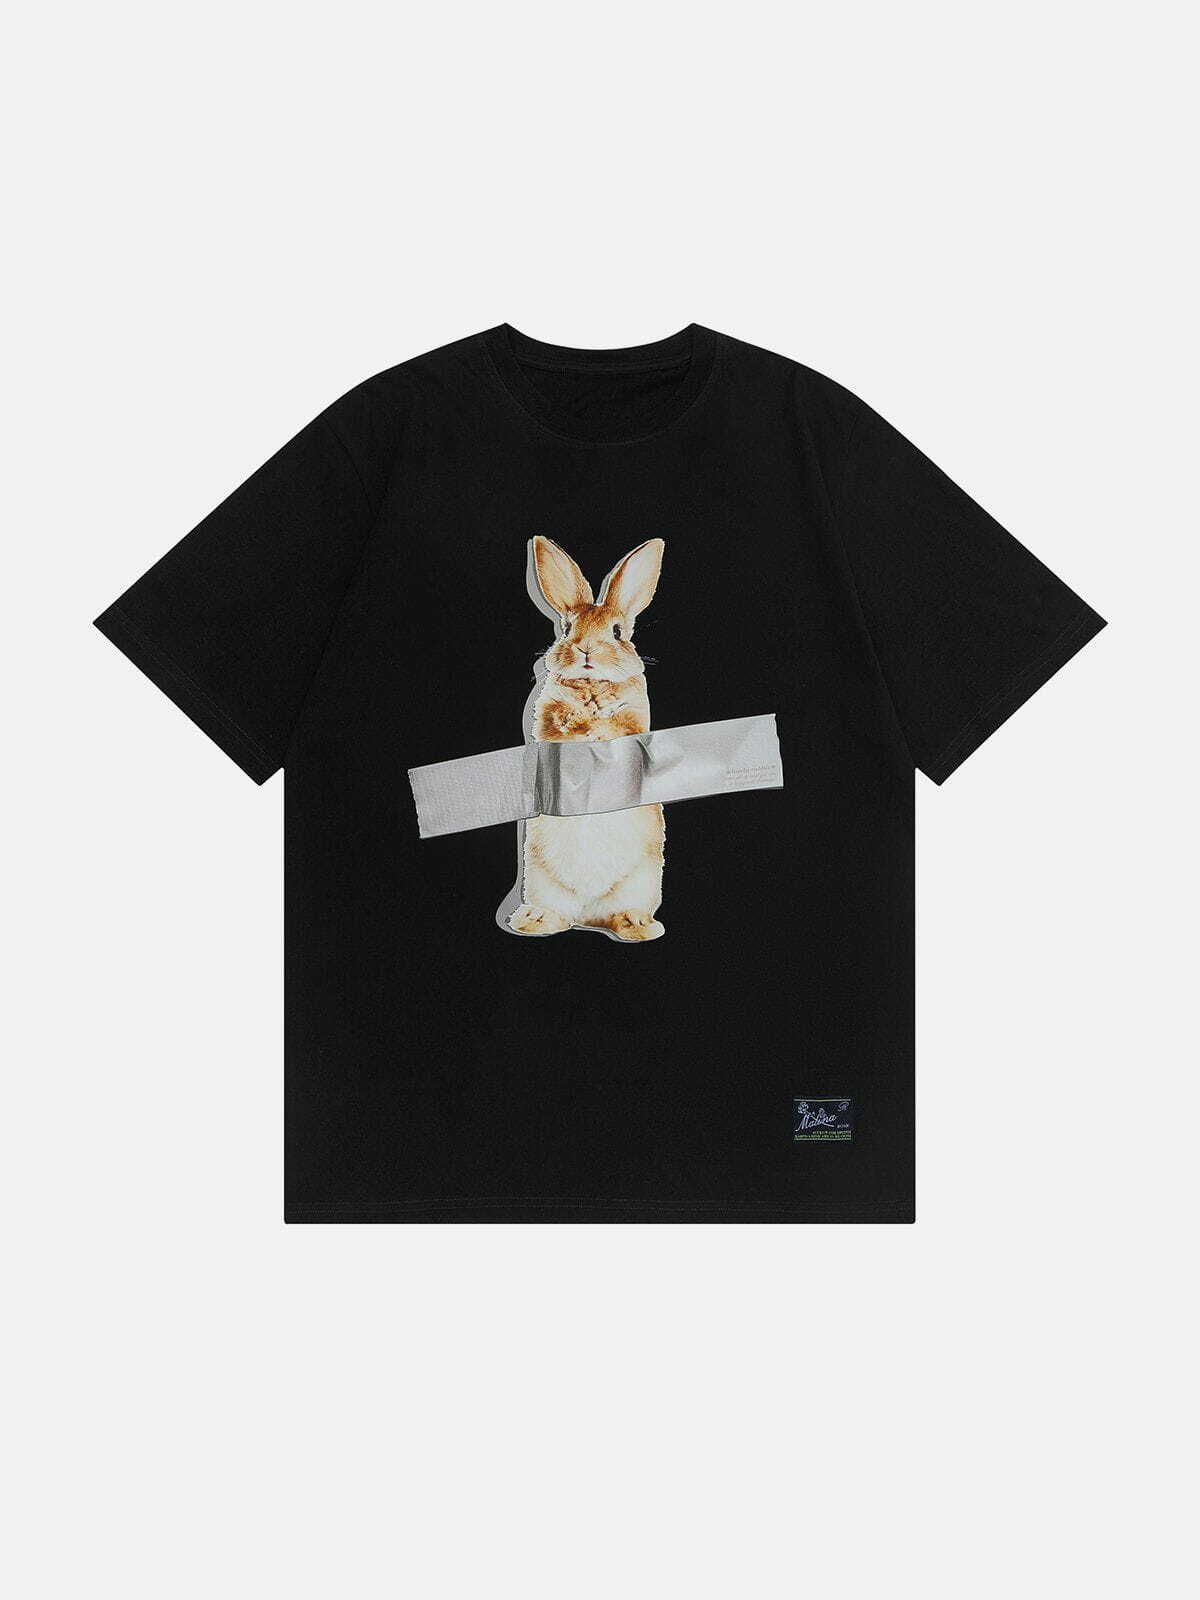 quirky rabbit print tee playful & unique streetwear 5401